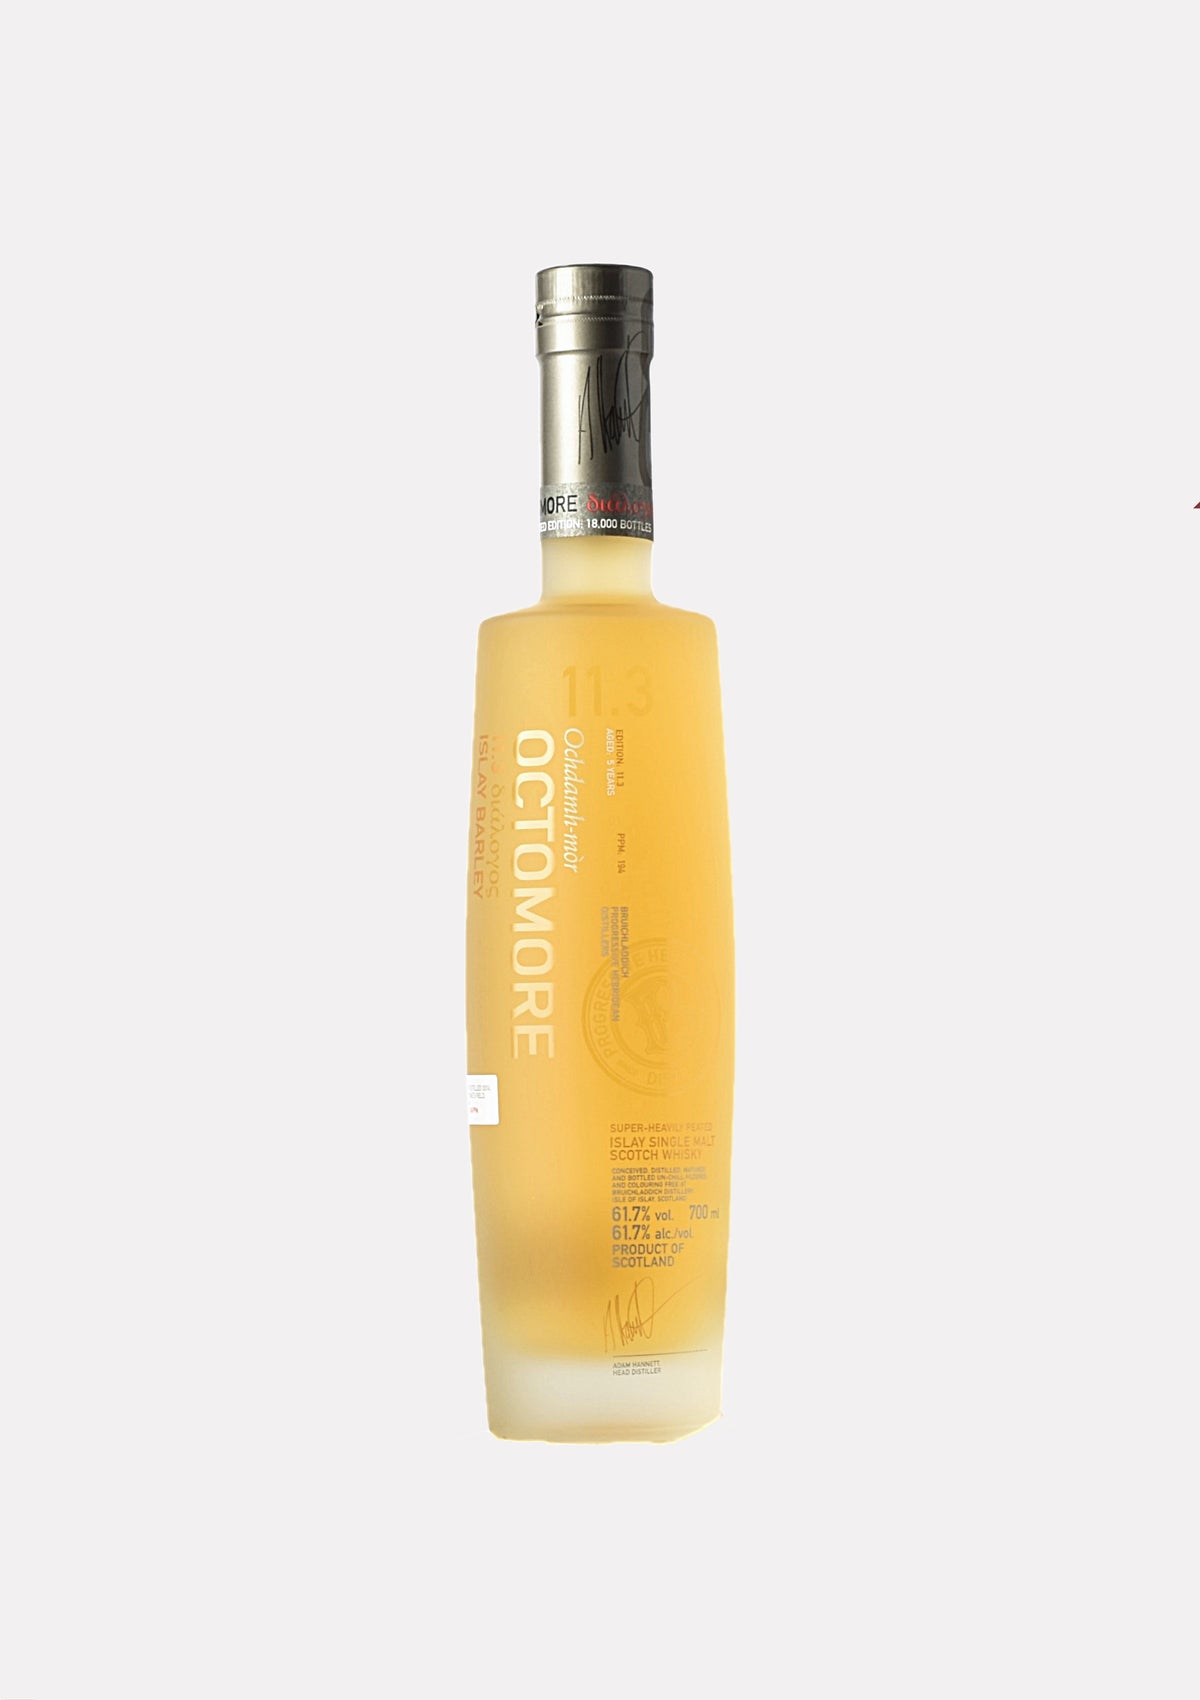 Octomore 2014- 2020 5 Jahre 11.3 194 ppm